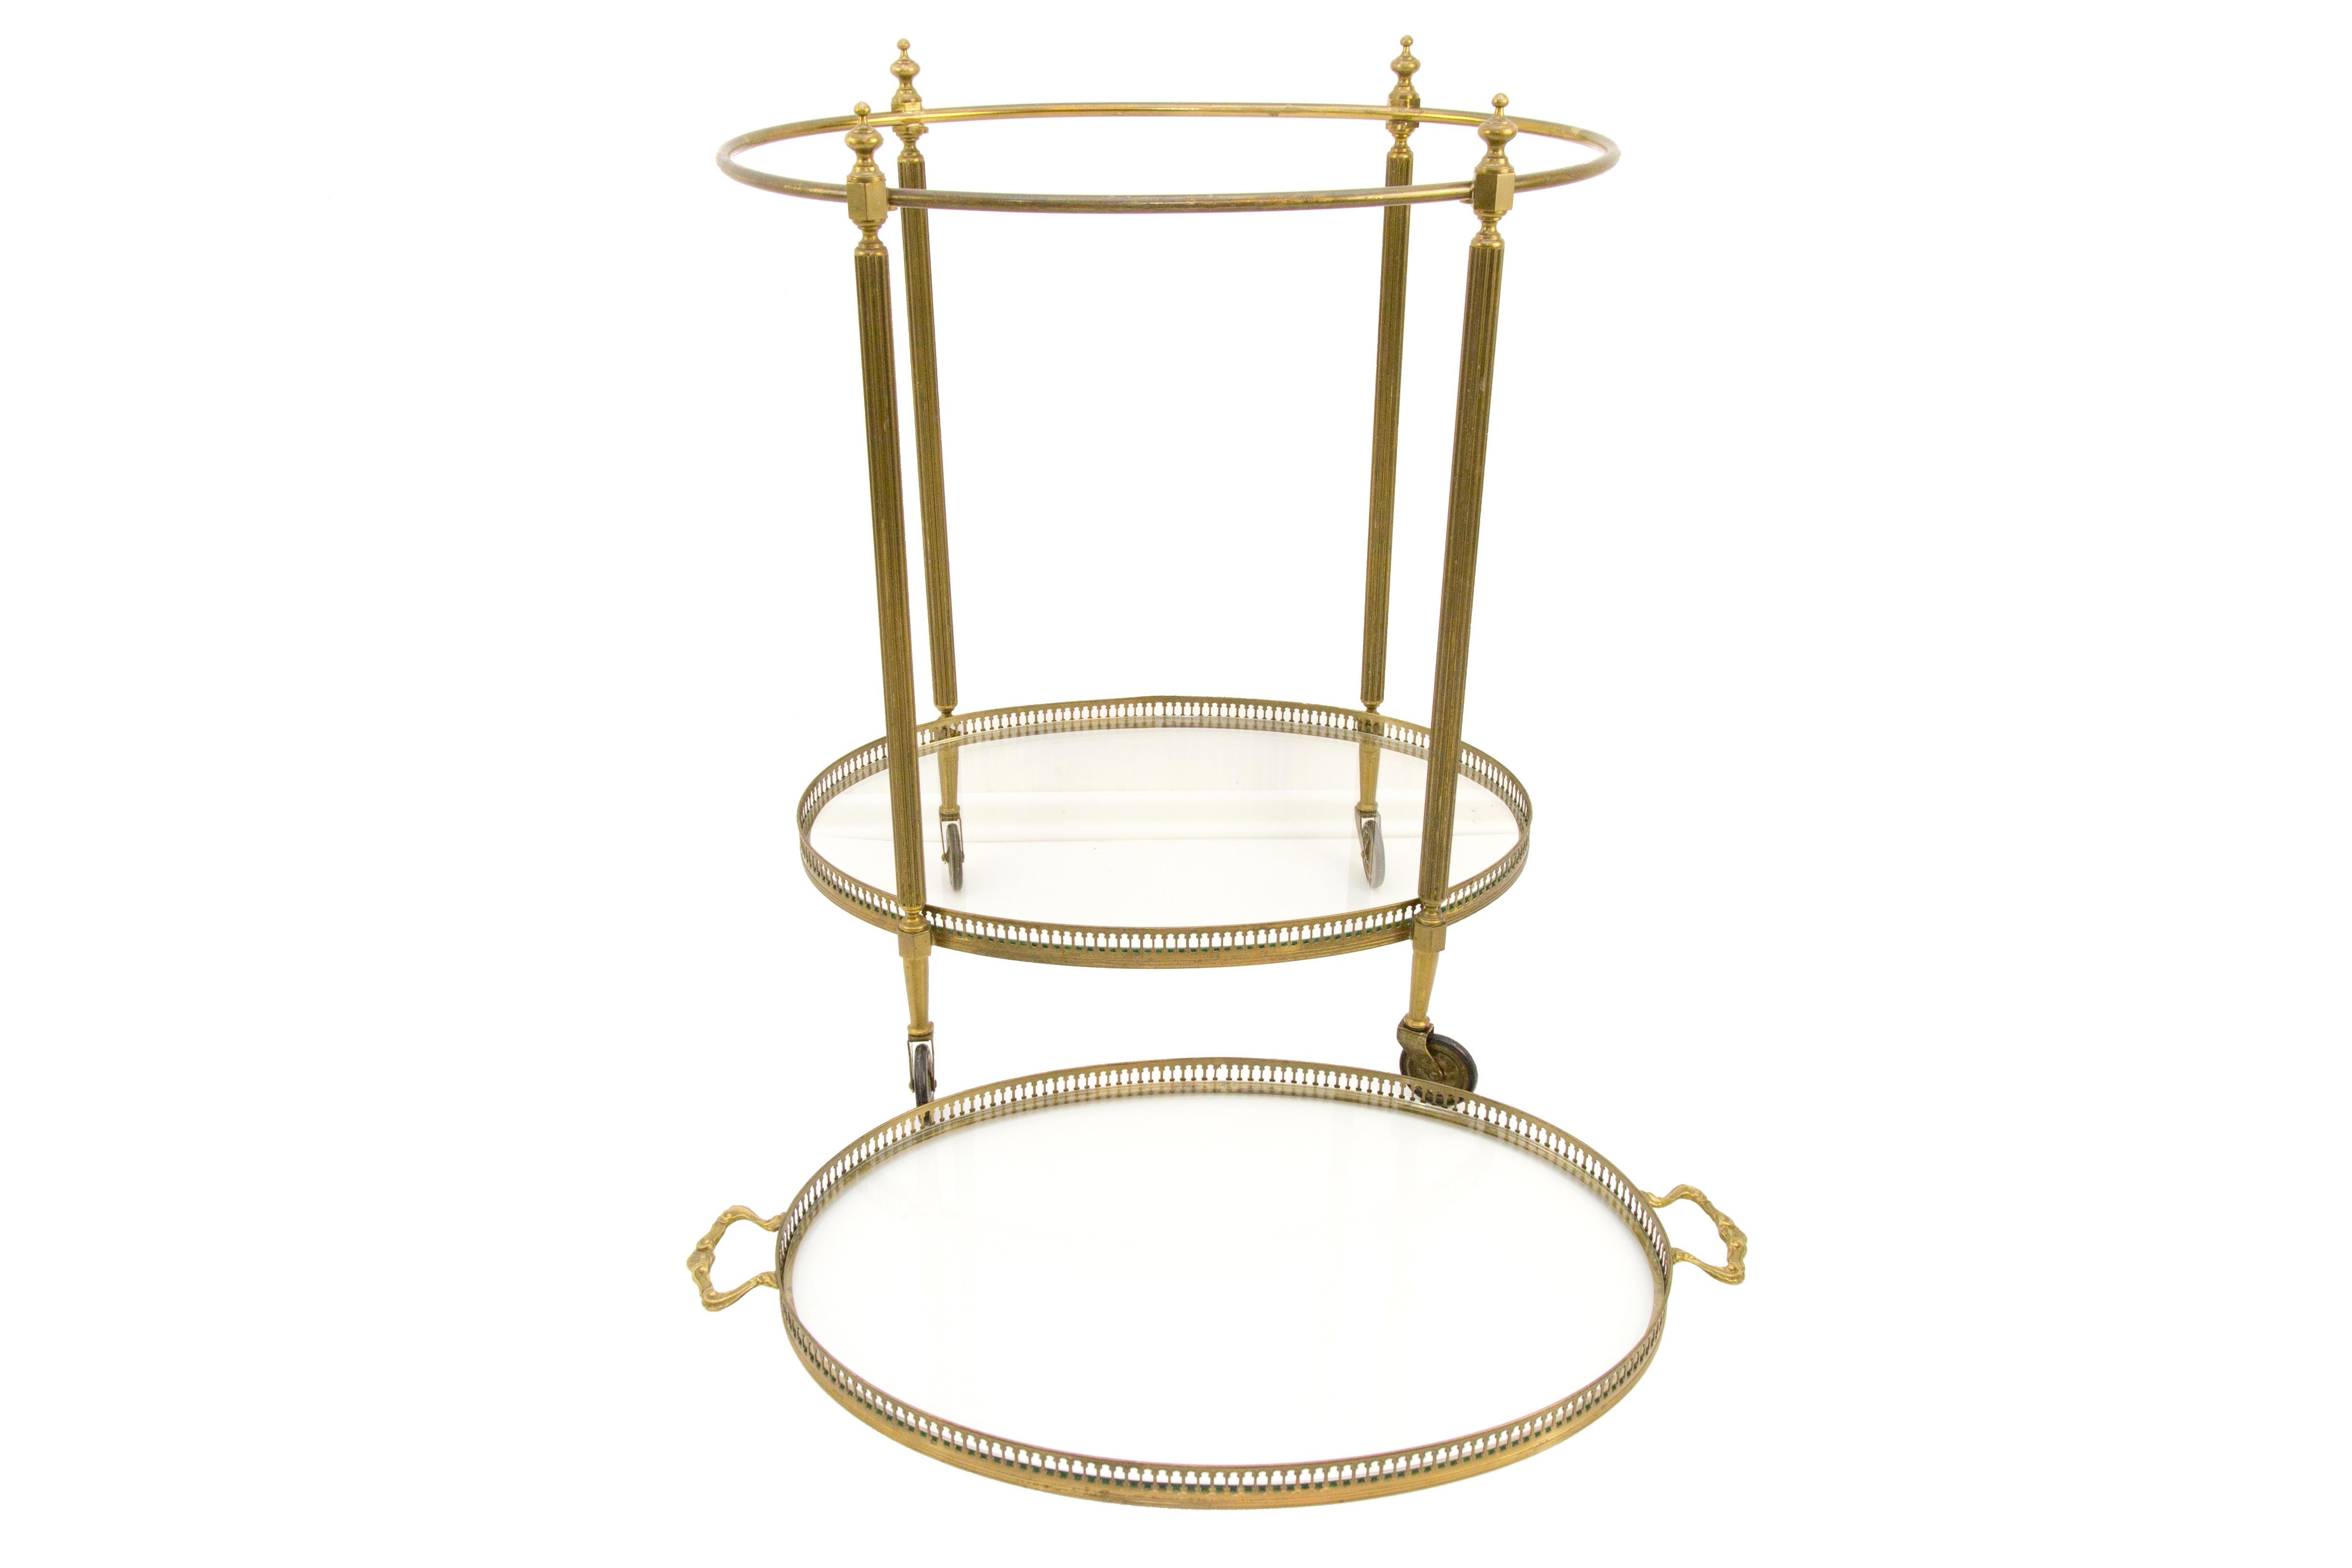 Elegant oval bar cart made of brass, bronze and glass in 1940s, France, attributed to Maison Baguès. The cart features 2 clear glass tops with brass galleried edges, serving tray is removable.
Measures: Height: 67 cm / 26.3 in, width 40 cm / 15.7